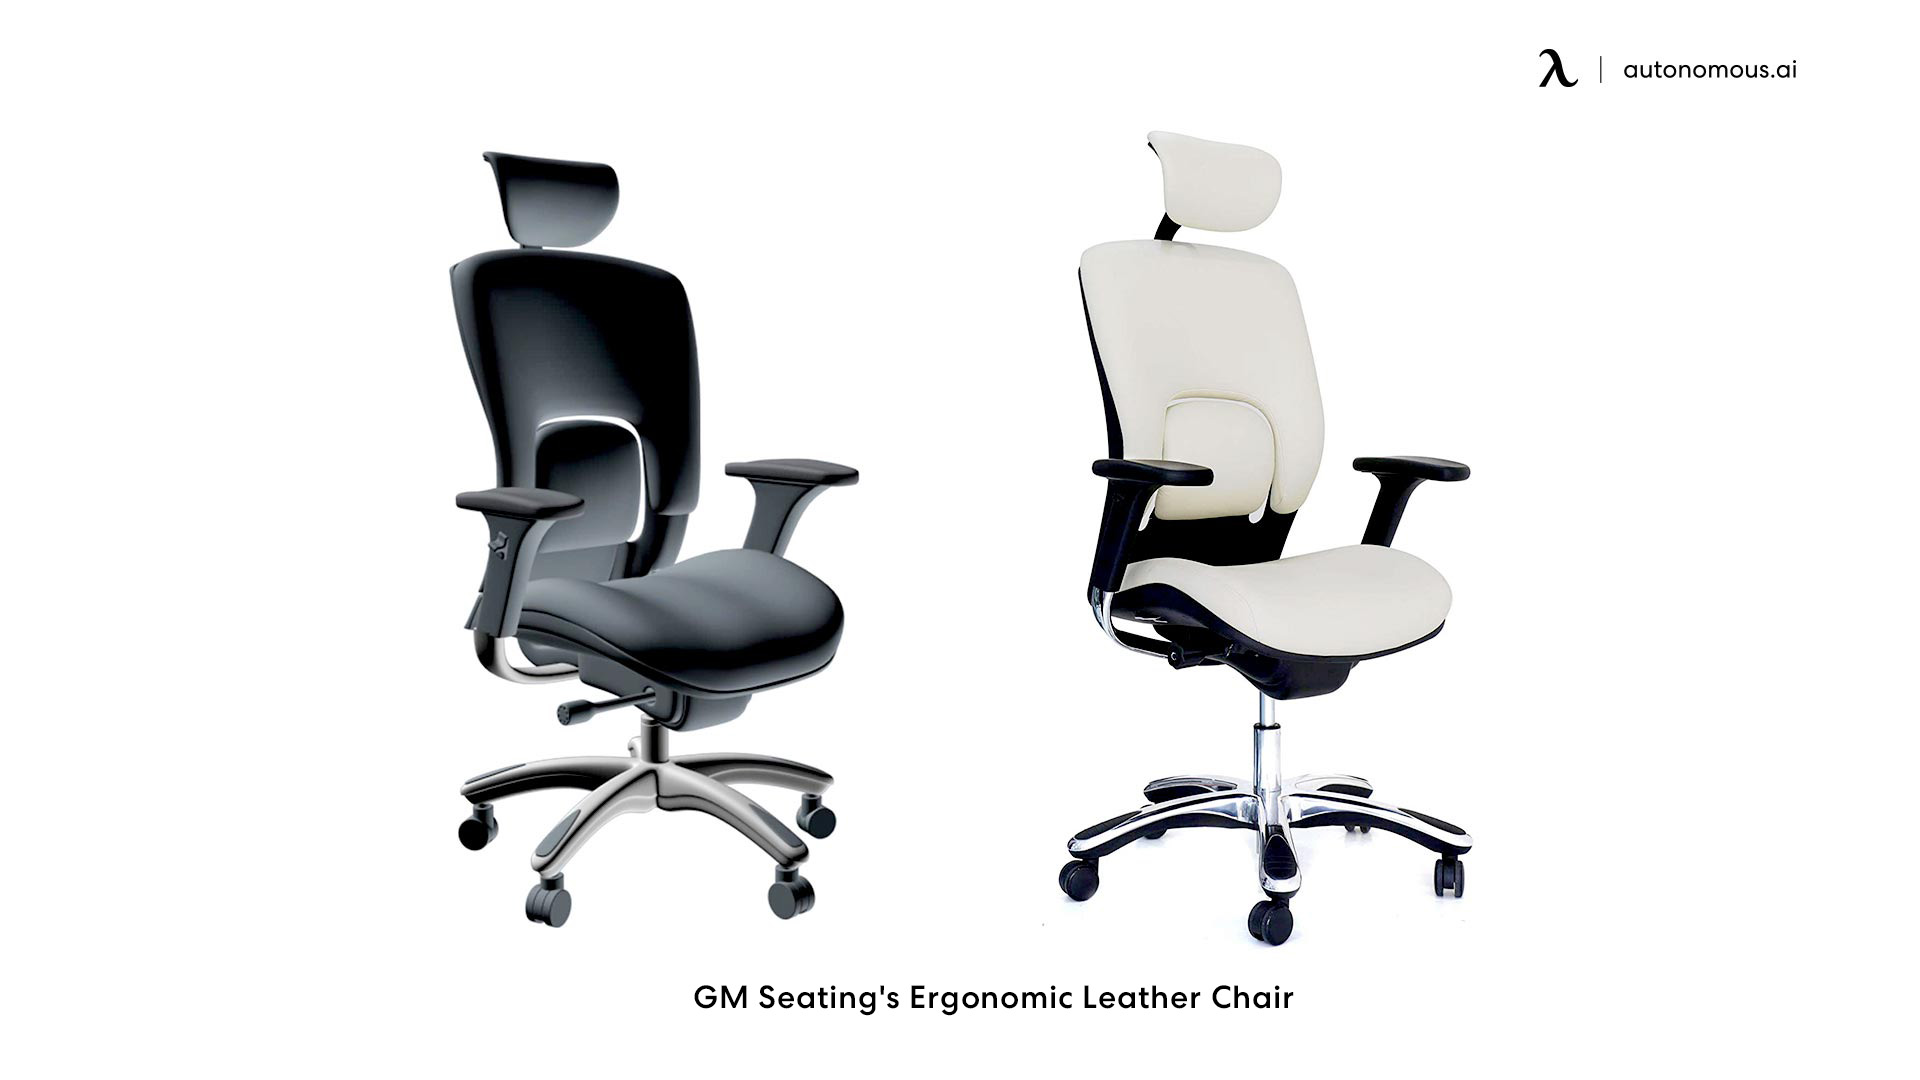 GM Seating's Ergonomic Leather Chair